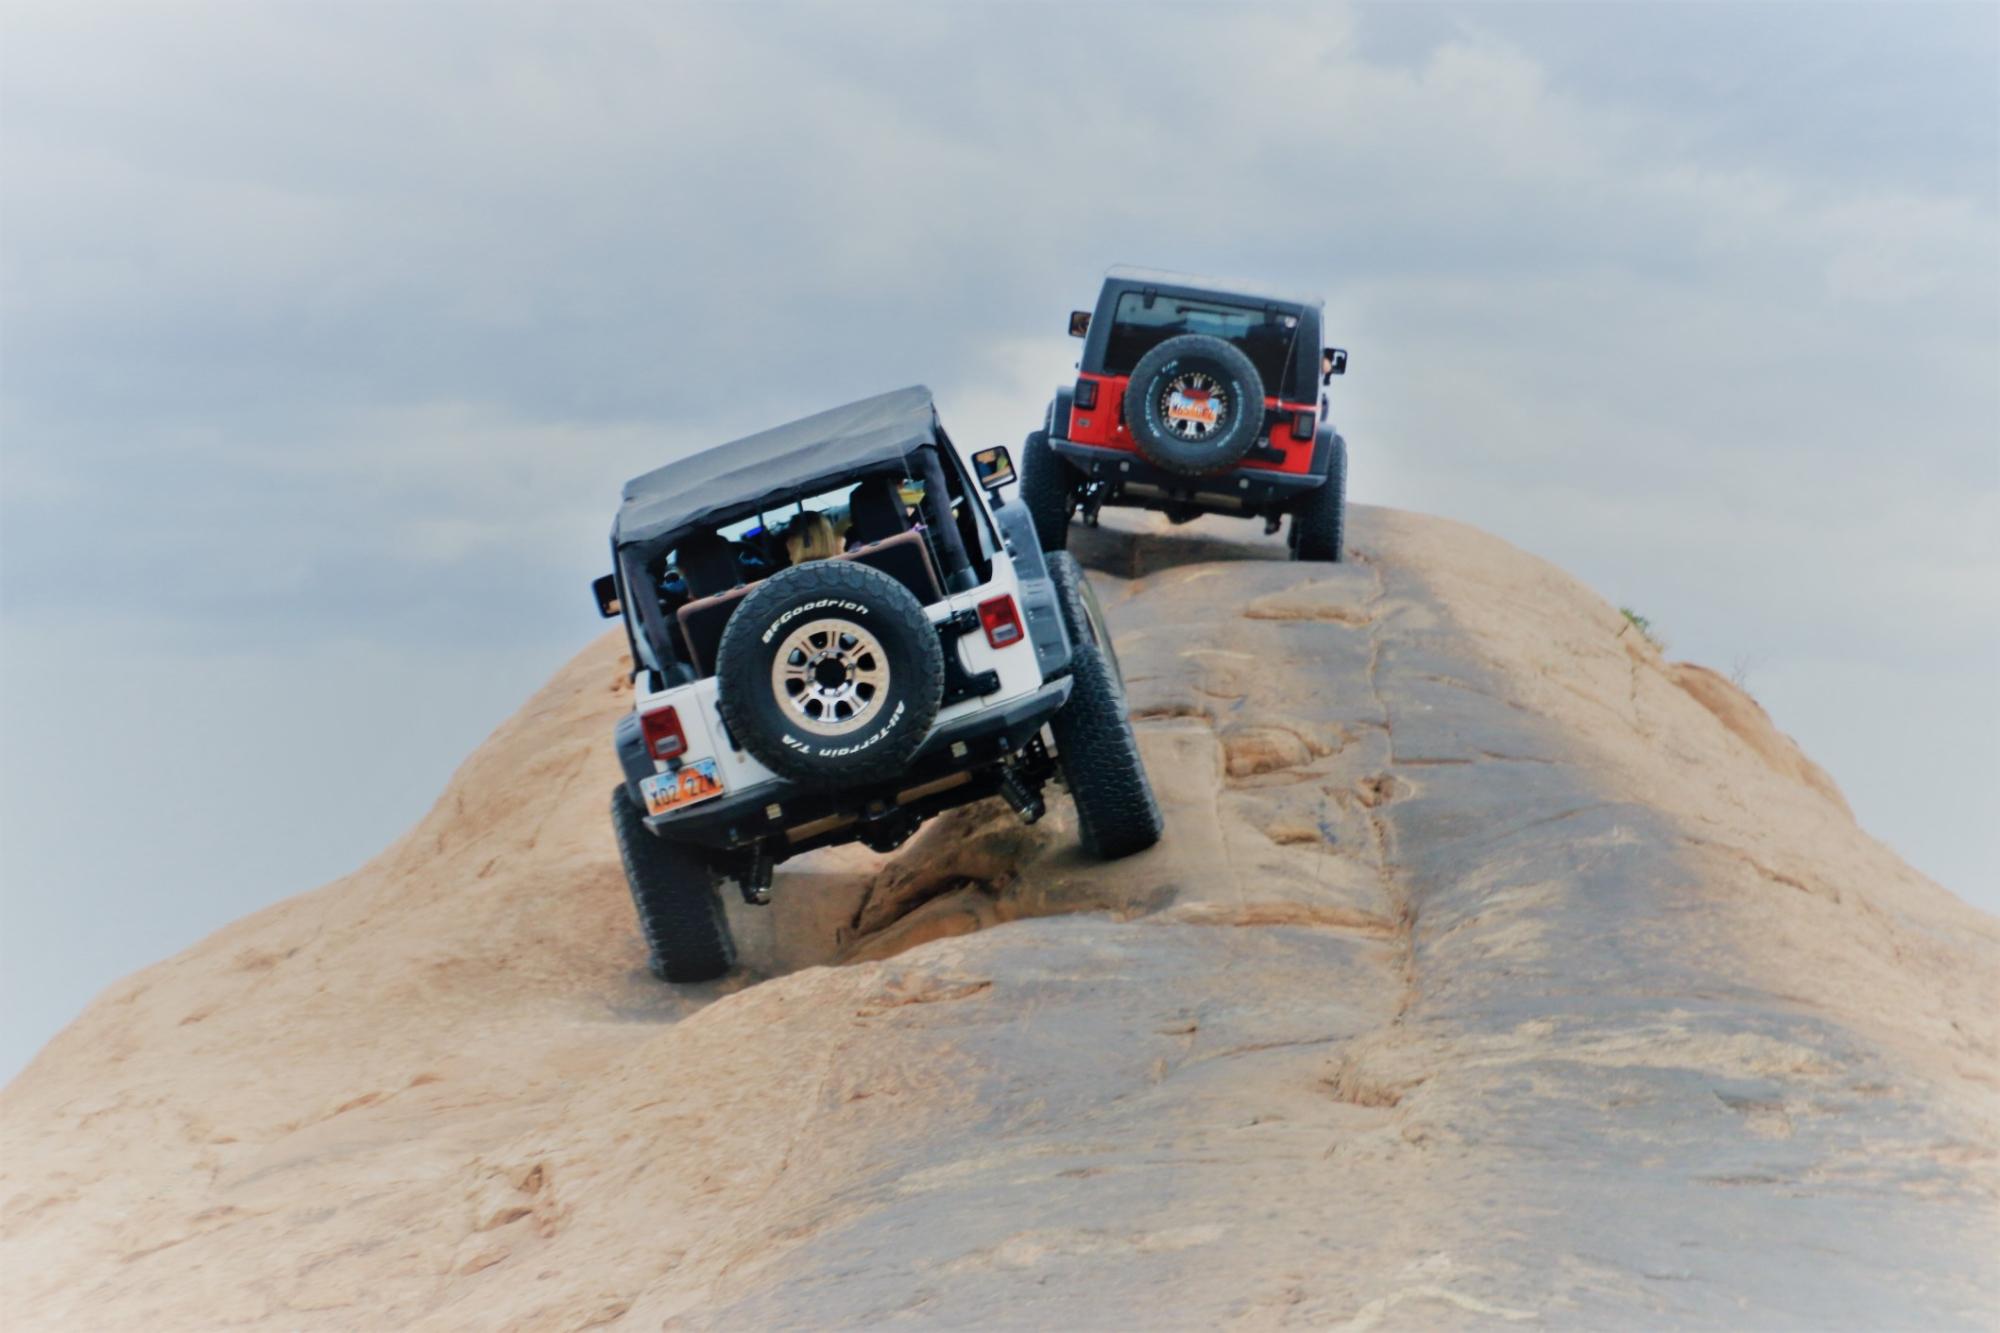 Rock crawling can be a fun part of the extreme off-roading lifestyle.